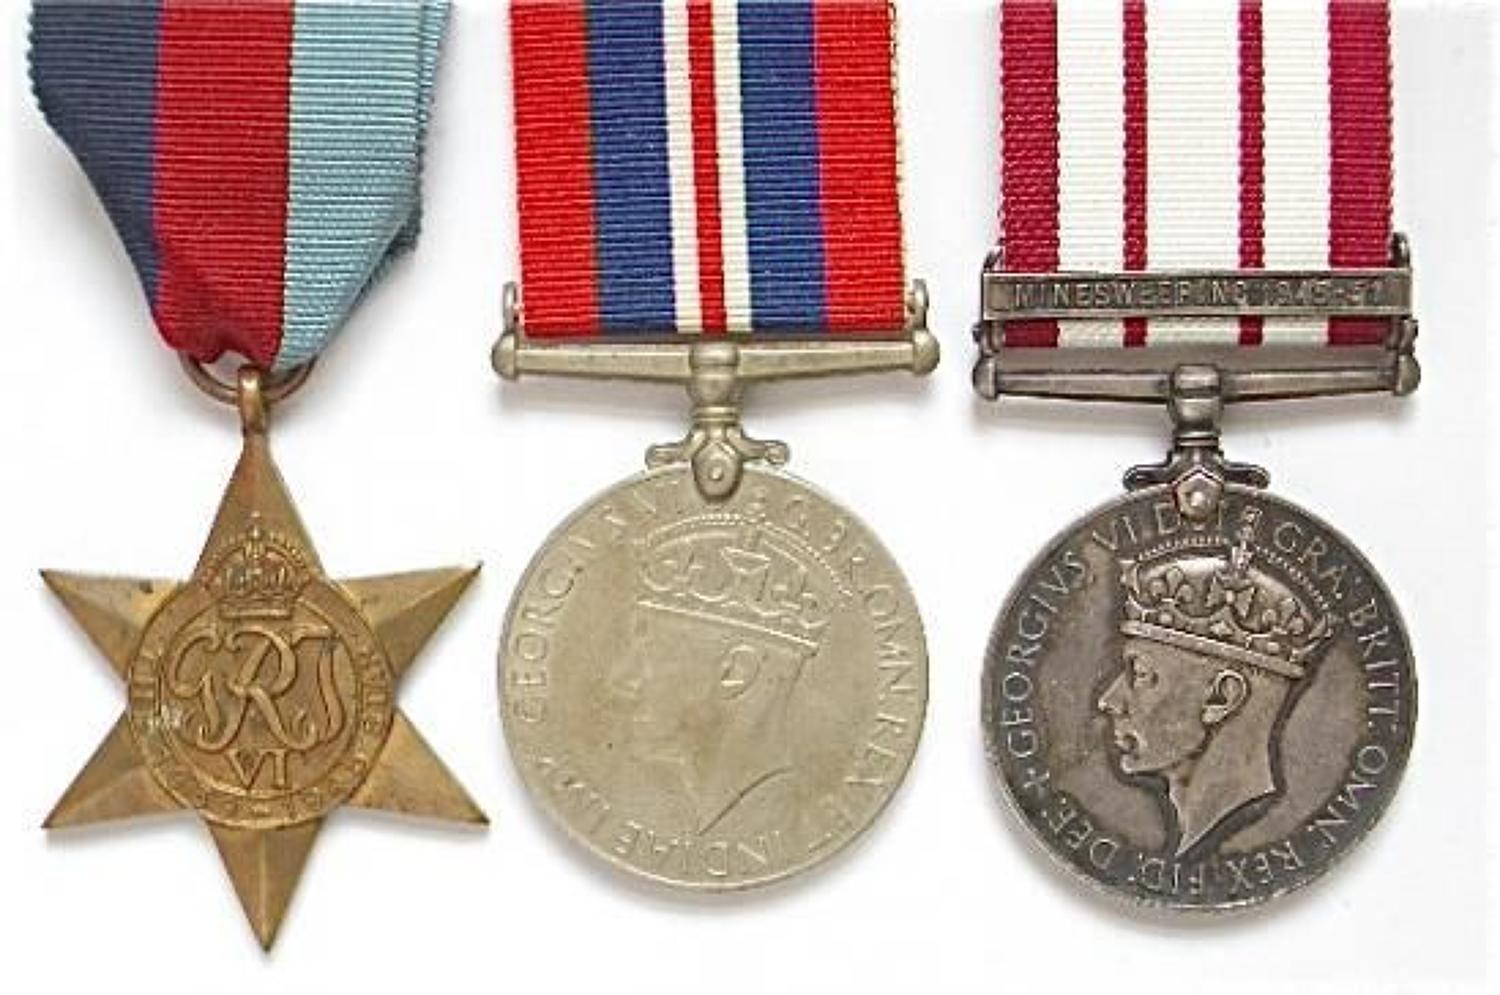 Royal Navy Naval General Service Medal Clasp Minesweeping 1945-51